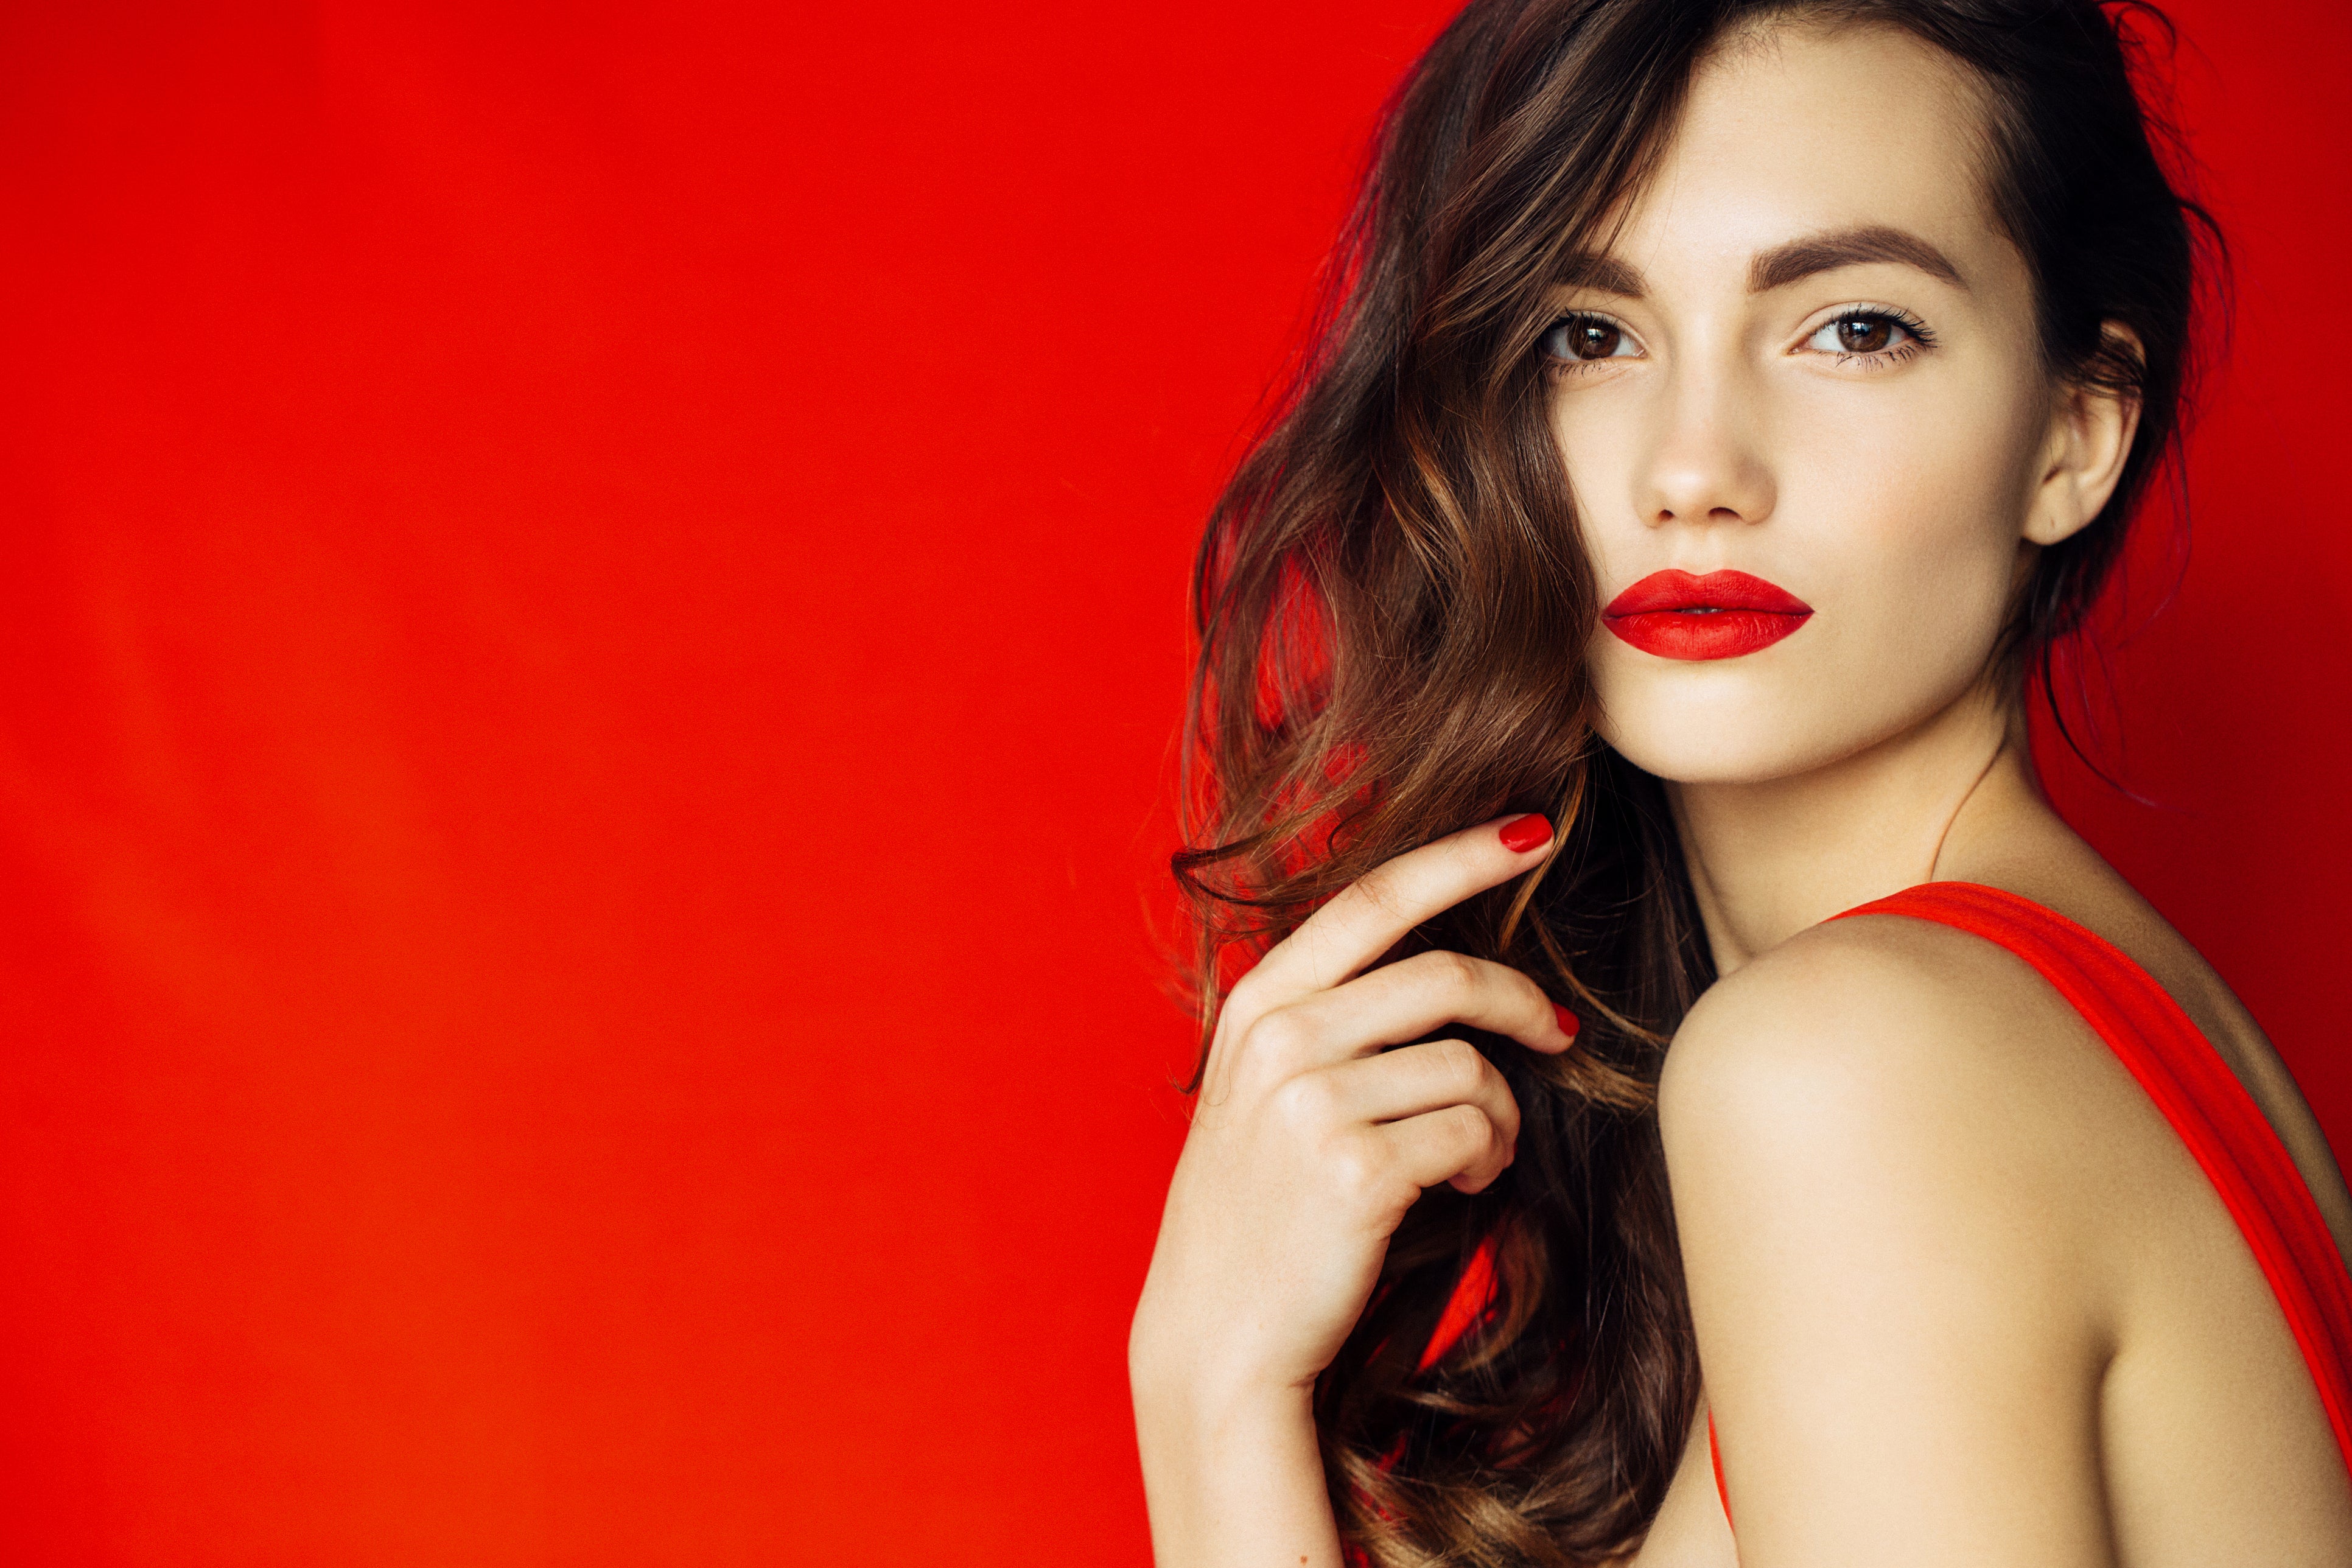 Turn Heads with These Best Lipstick Colors for a Red Dress